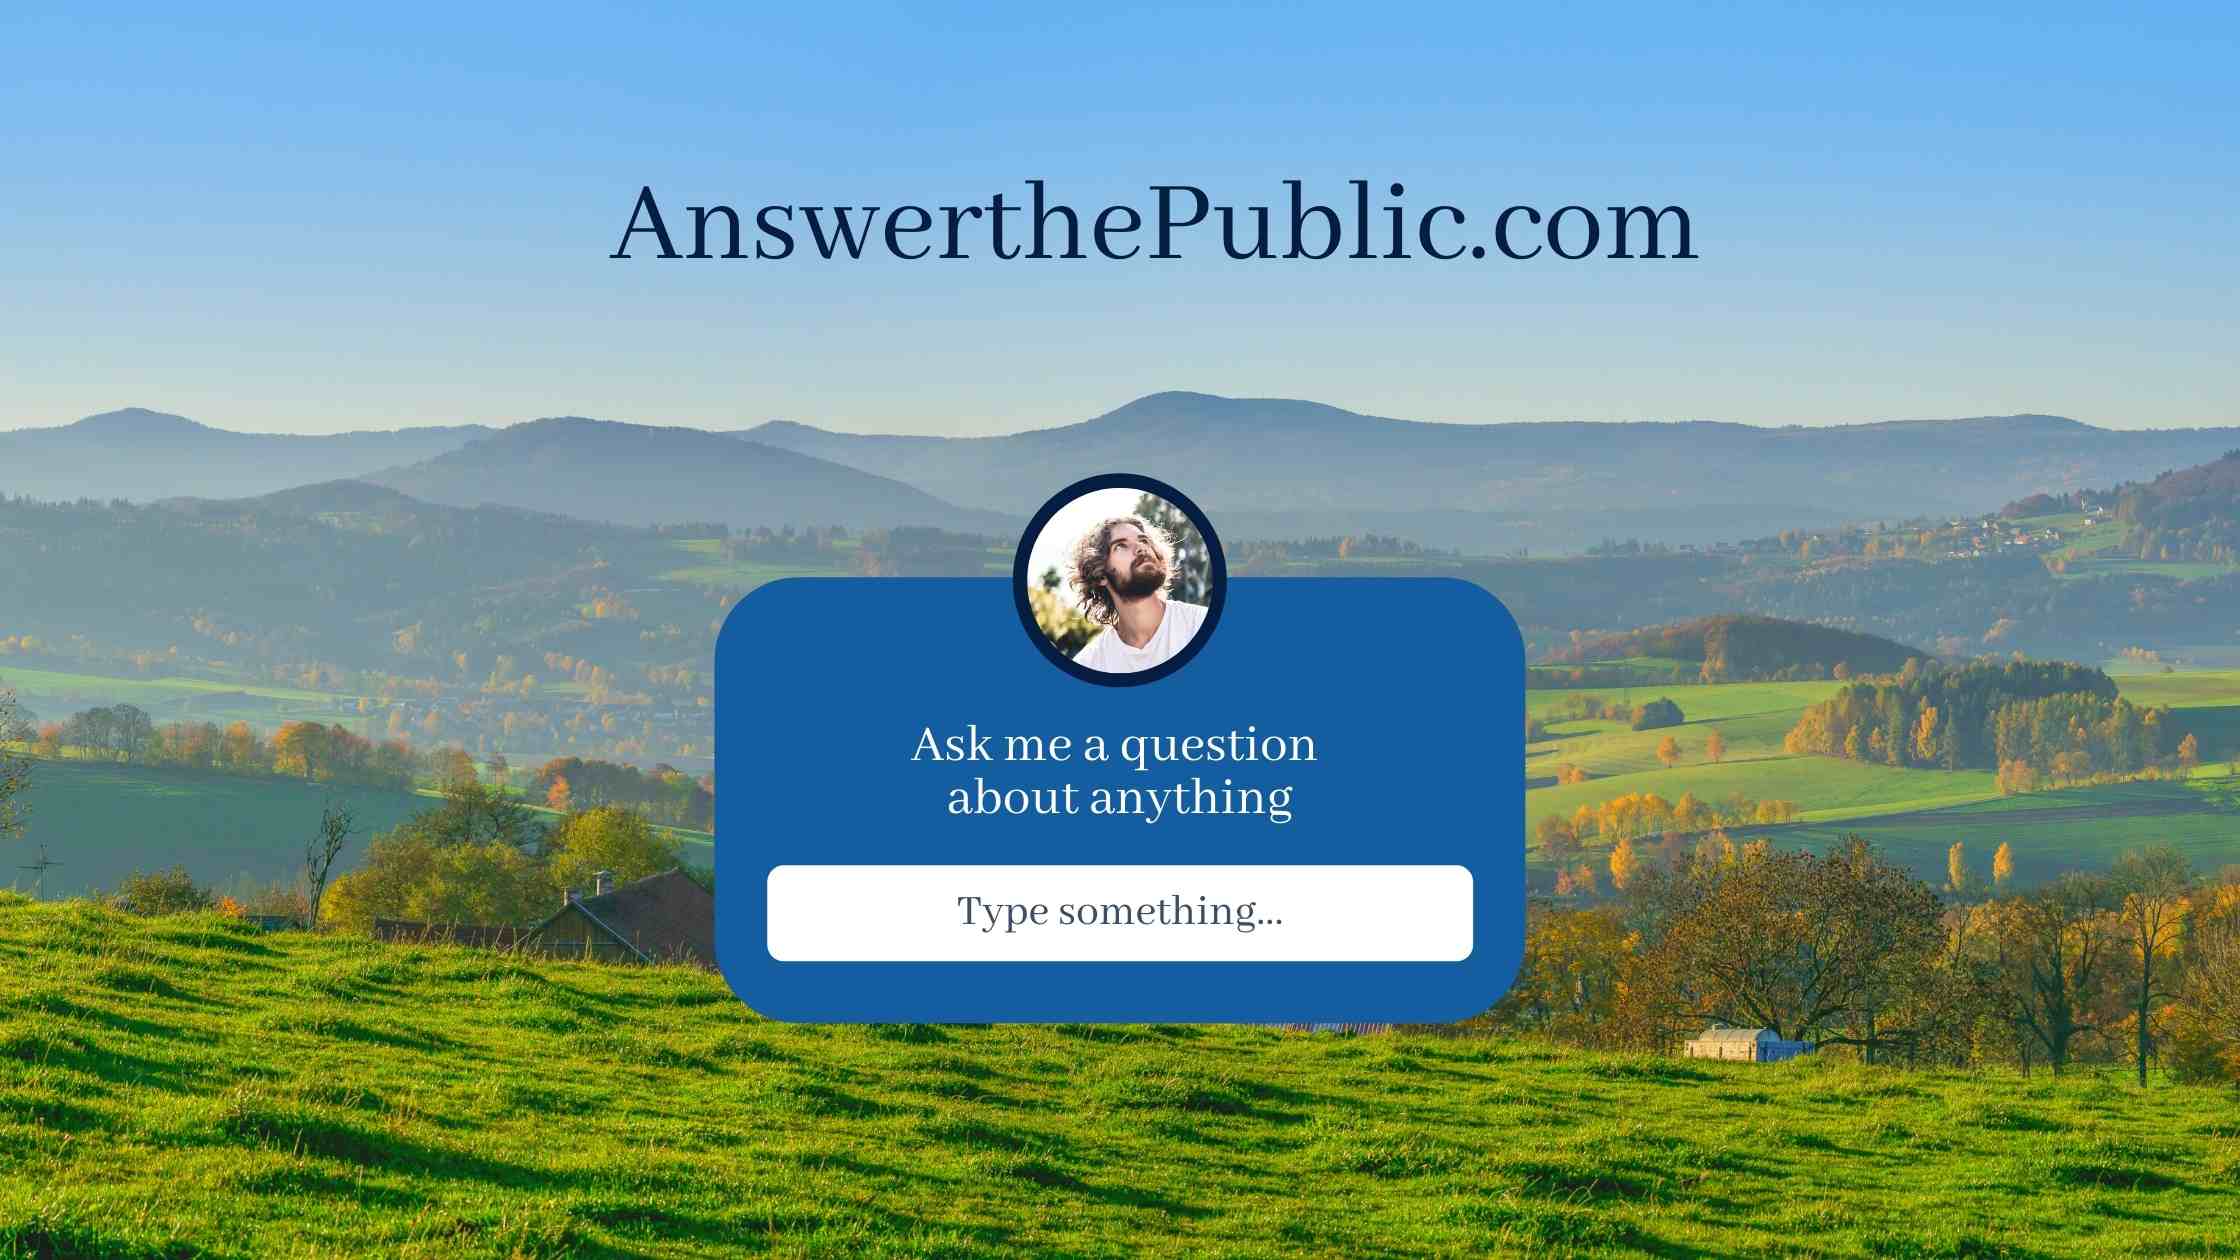 While I appreciated it more when it was 100% free, AnswerThePublic is a tool that I've used regularly for blogging and finding blog and video topics.